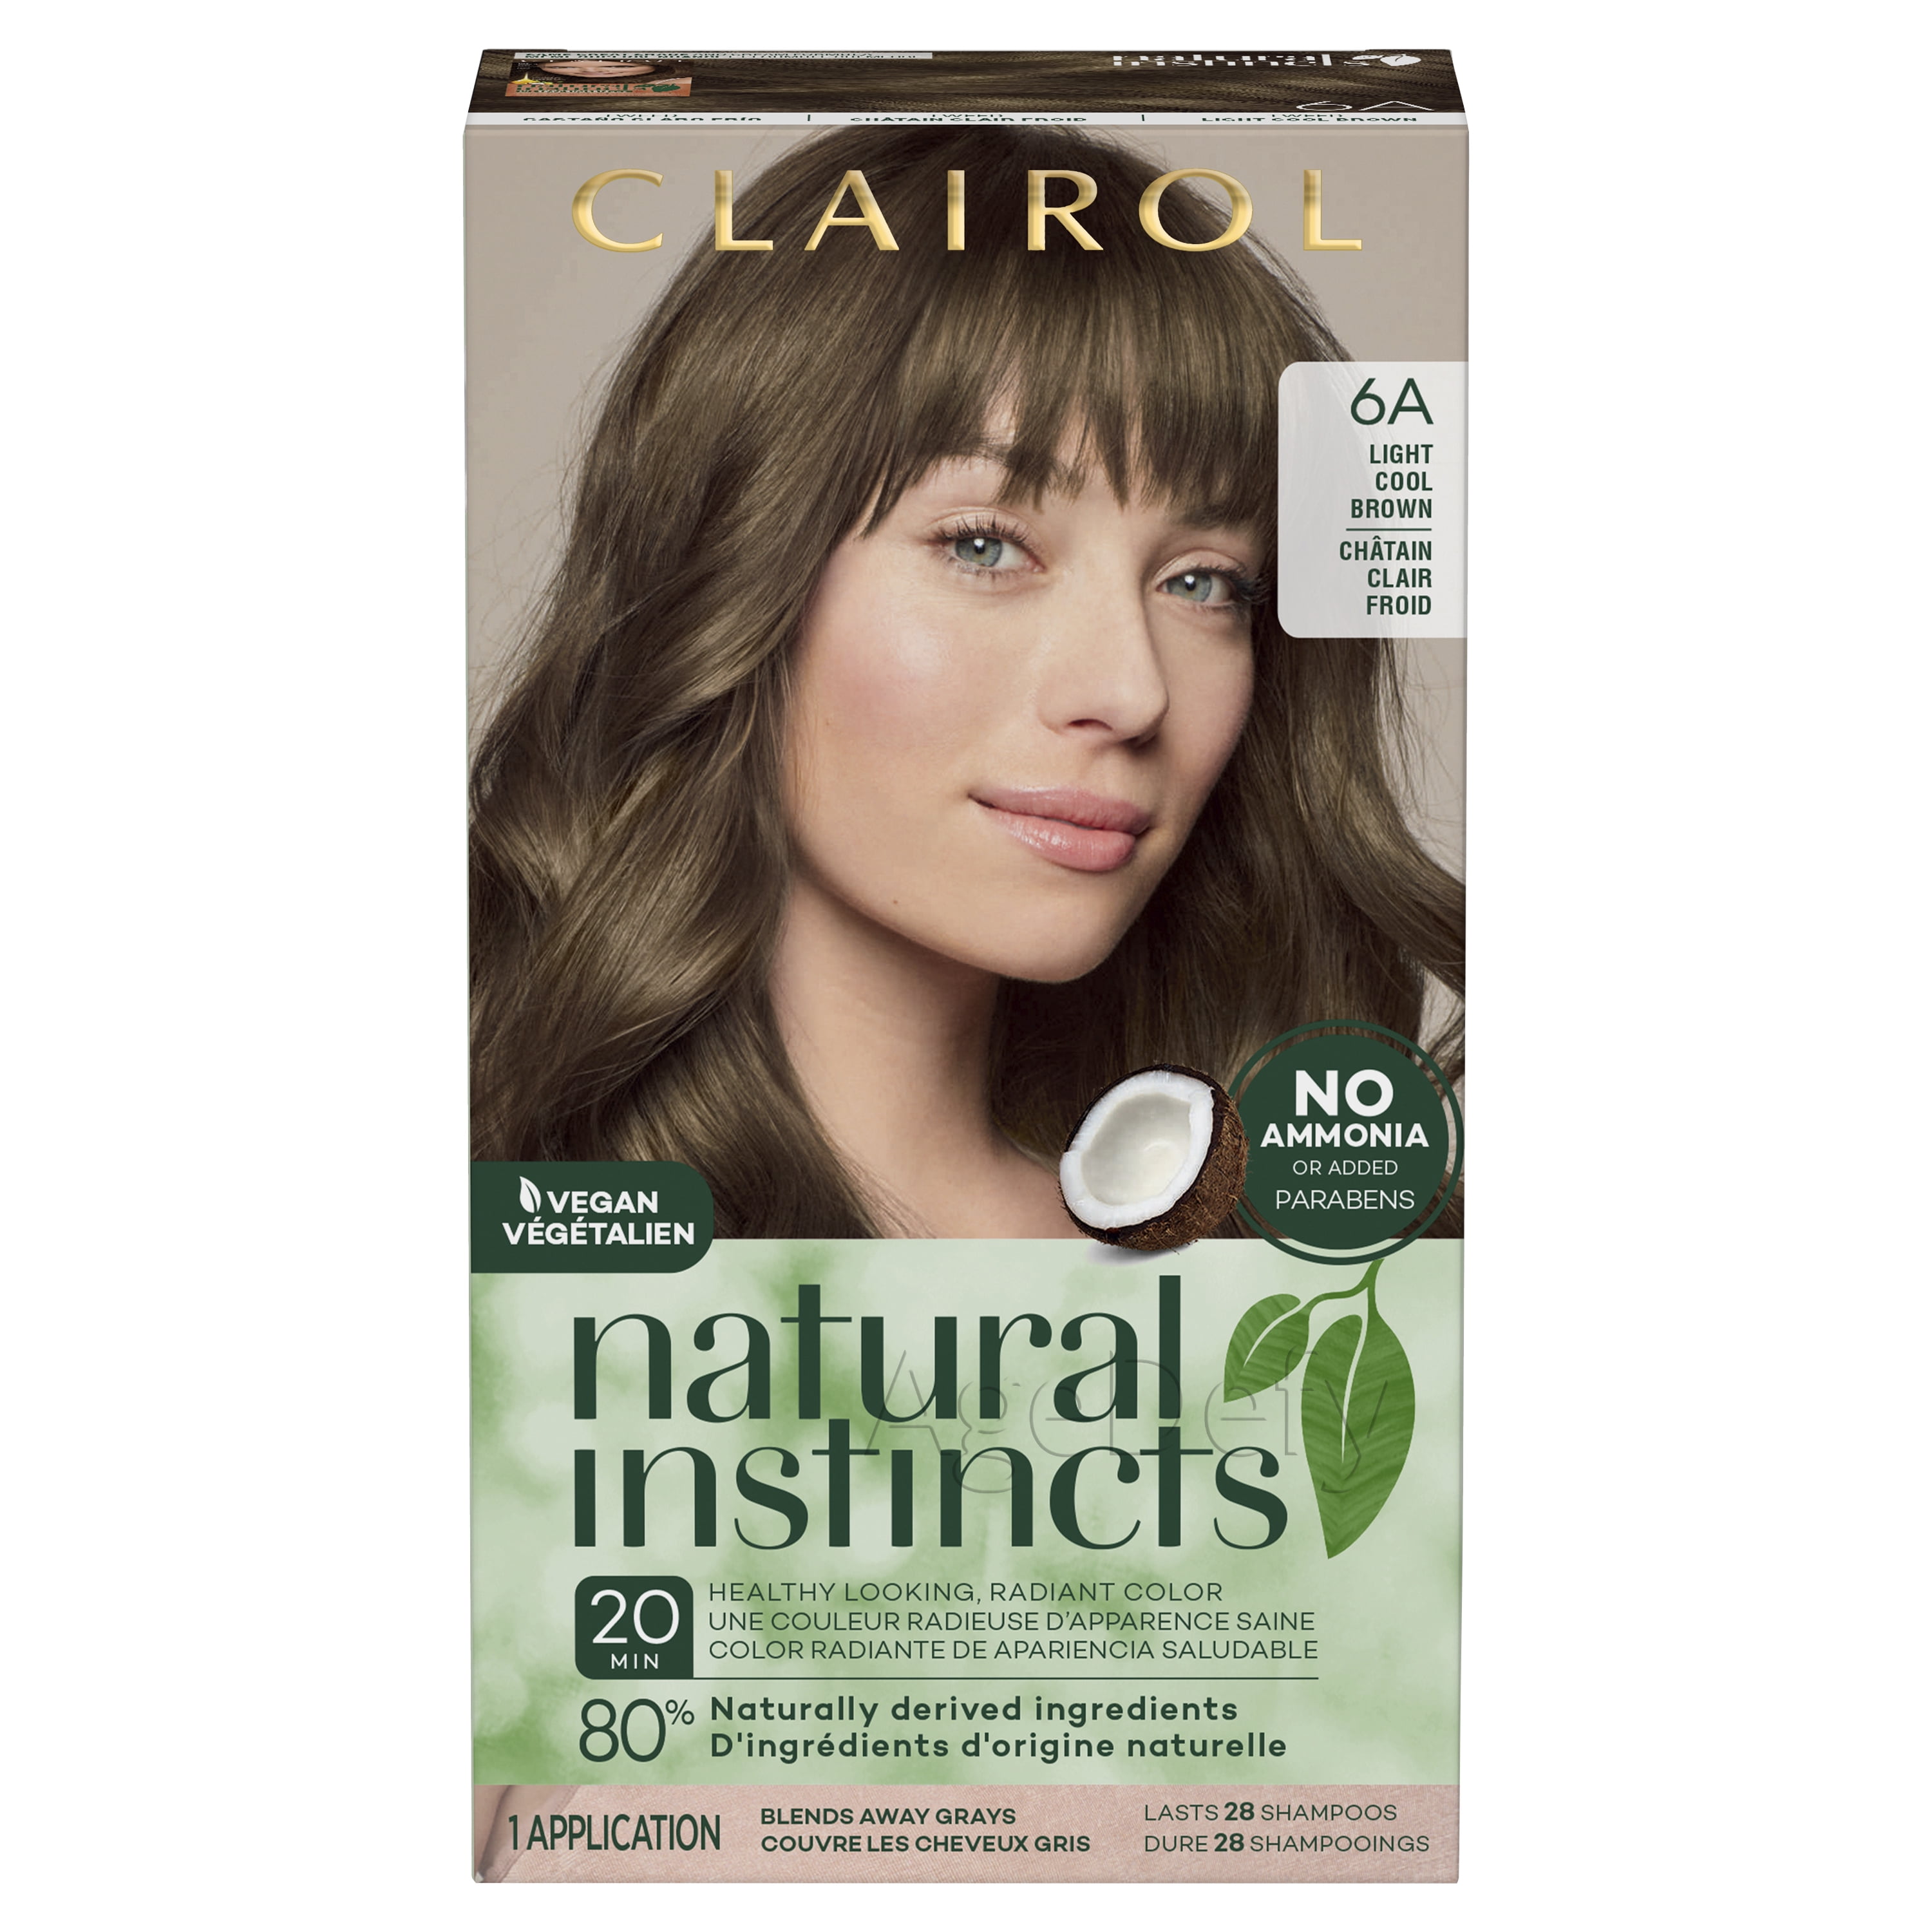 Clairol Natural Instincts Demi-Permanent Hair Color Creme, 6A Light Cool  Brown, Hair Dye, 1 Application 